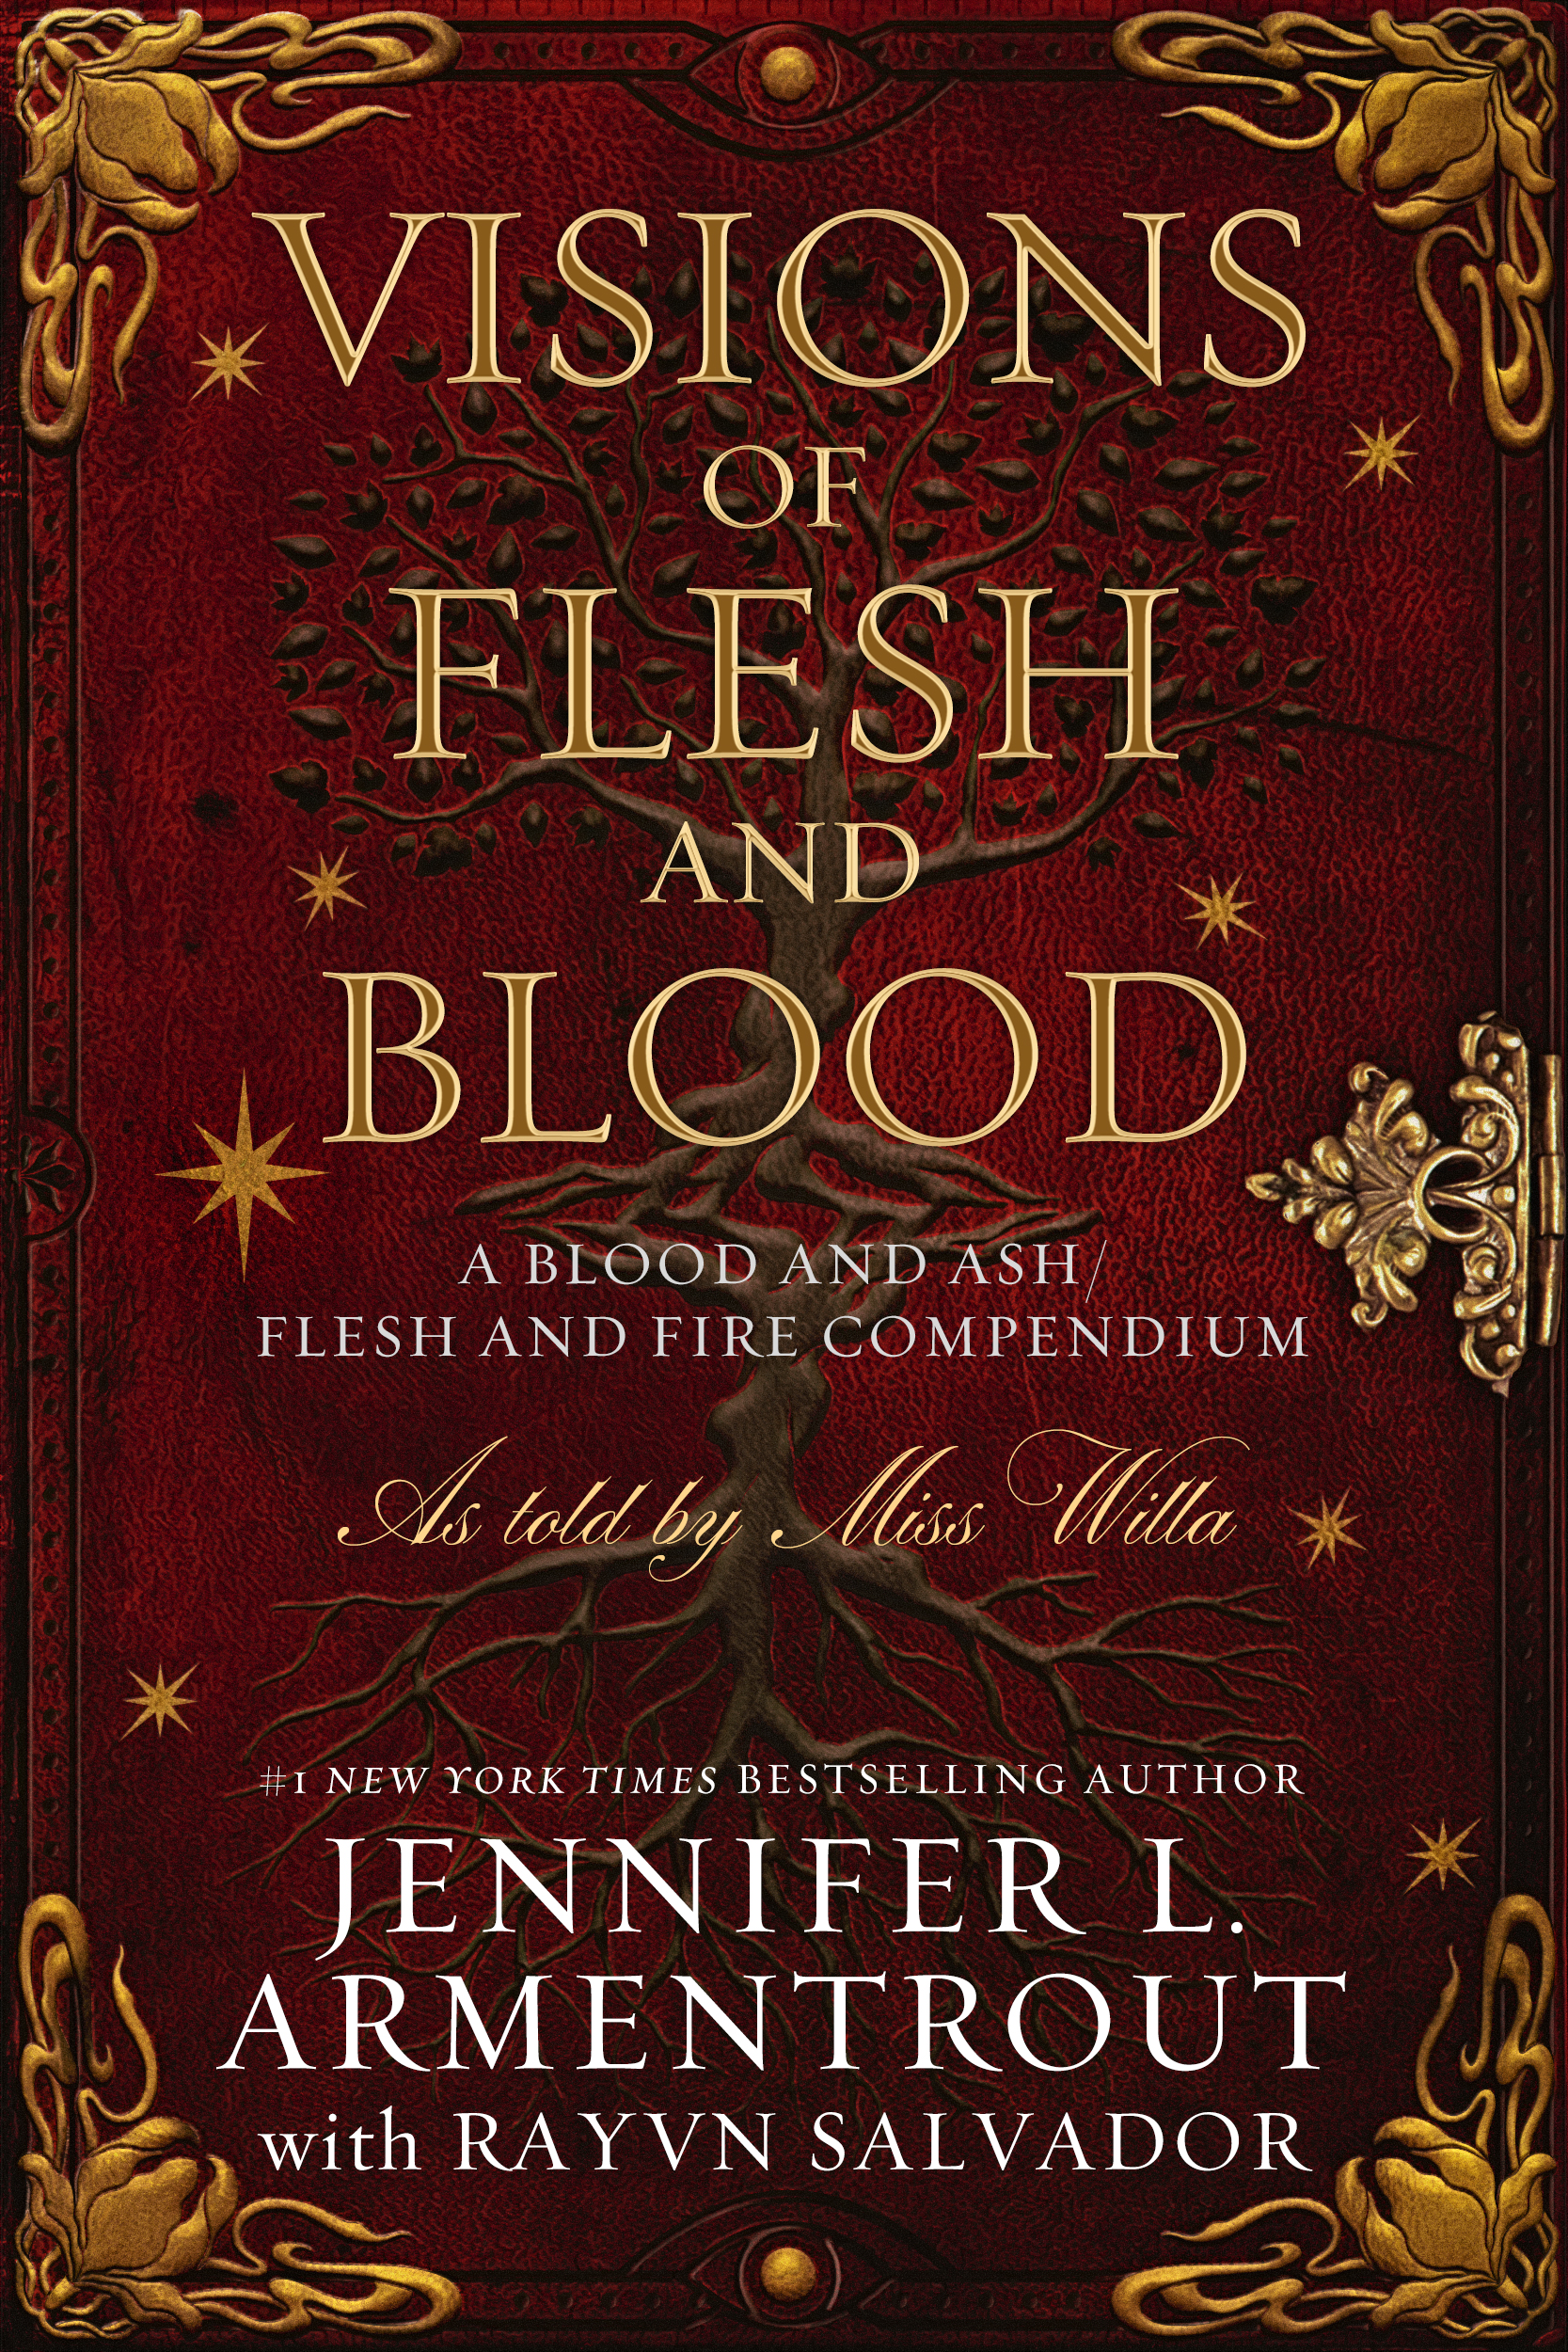 VISIONS OF FLESH AND BLOOD: A Blood and Ash/Flesh and Fire Compendium